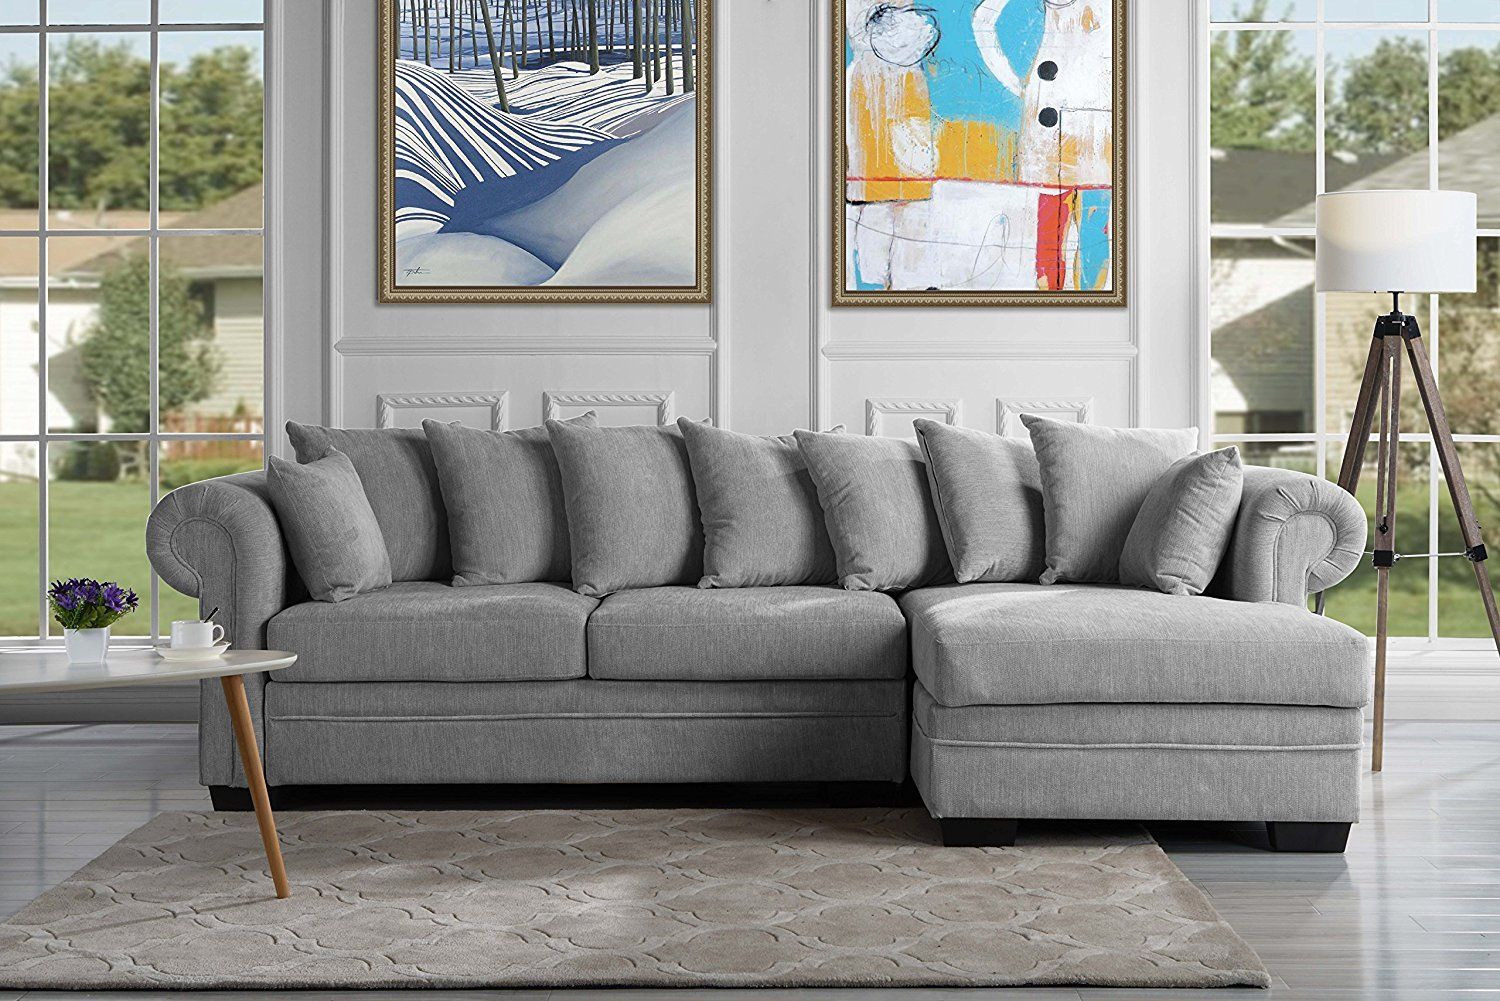 Modern Large Sectional Sofa, L Shape Couch W/ Extra Wide Chaise, Light Intended For Sofas In Light Gray (Gallery 18 of 22)